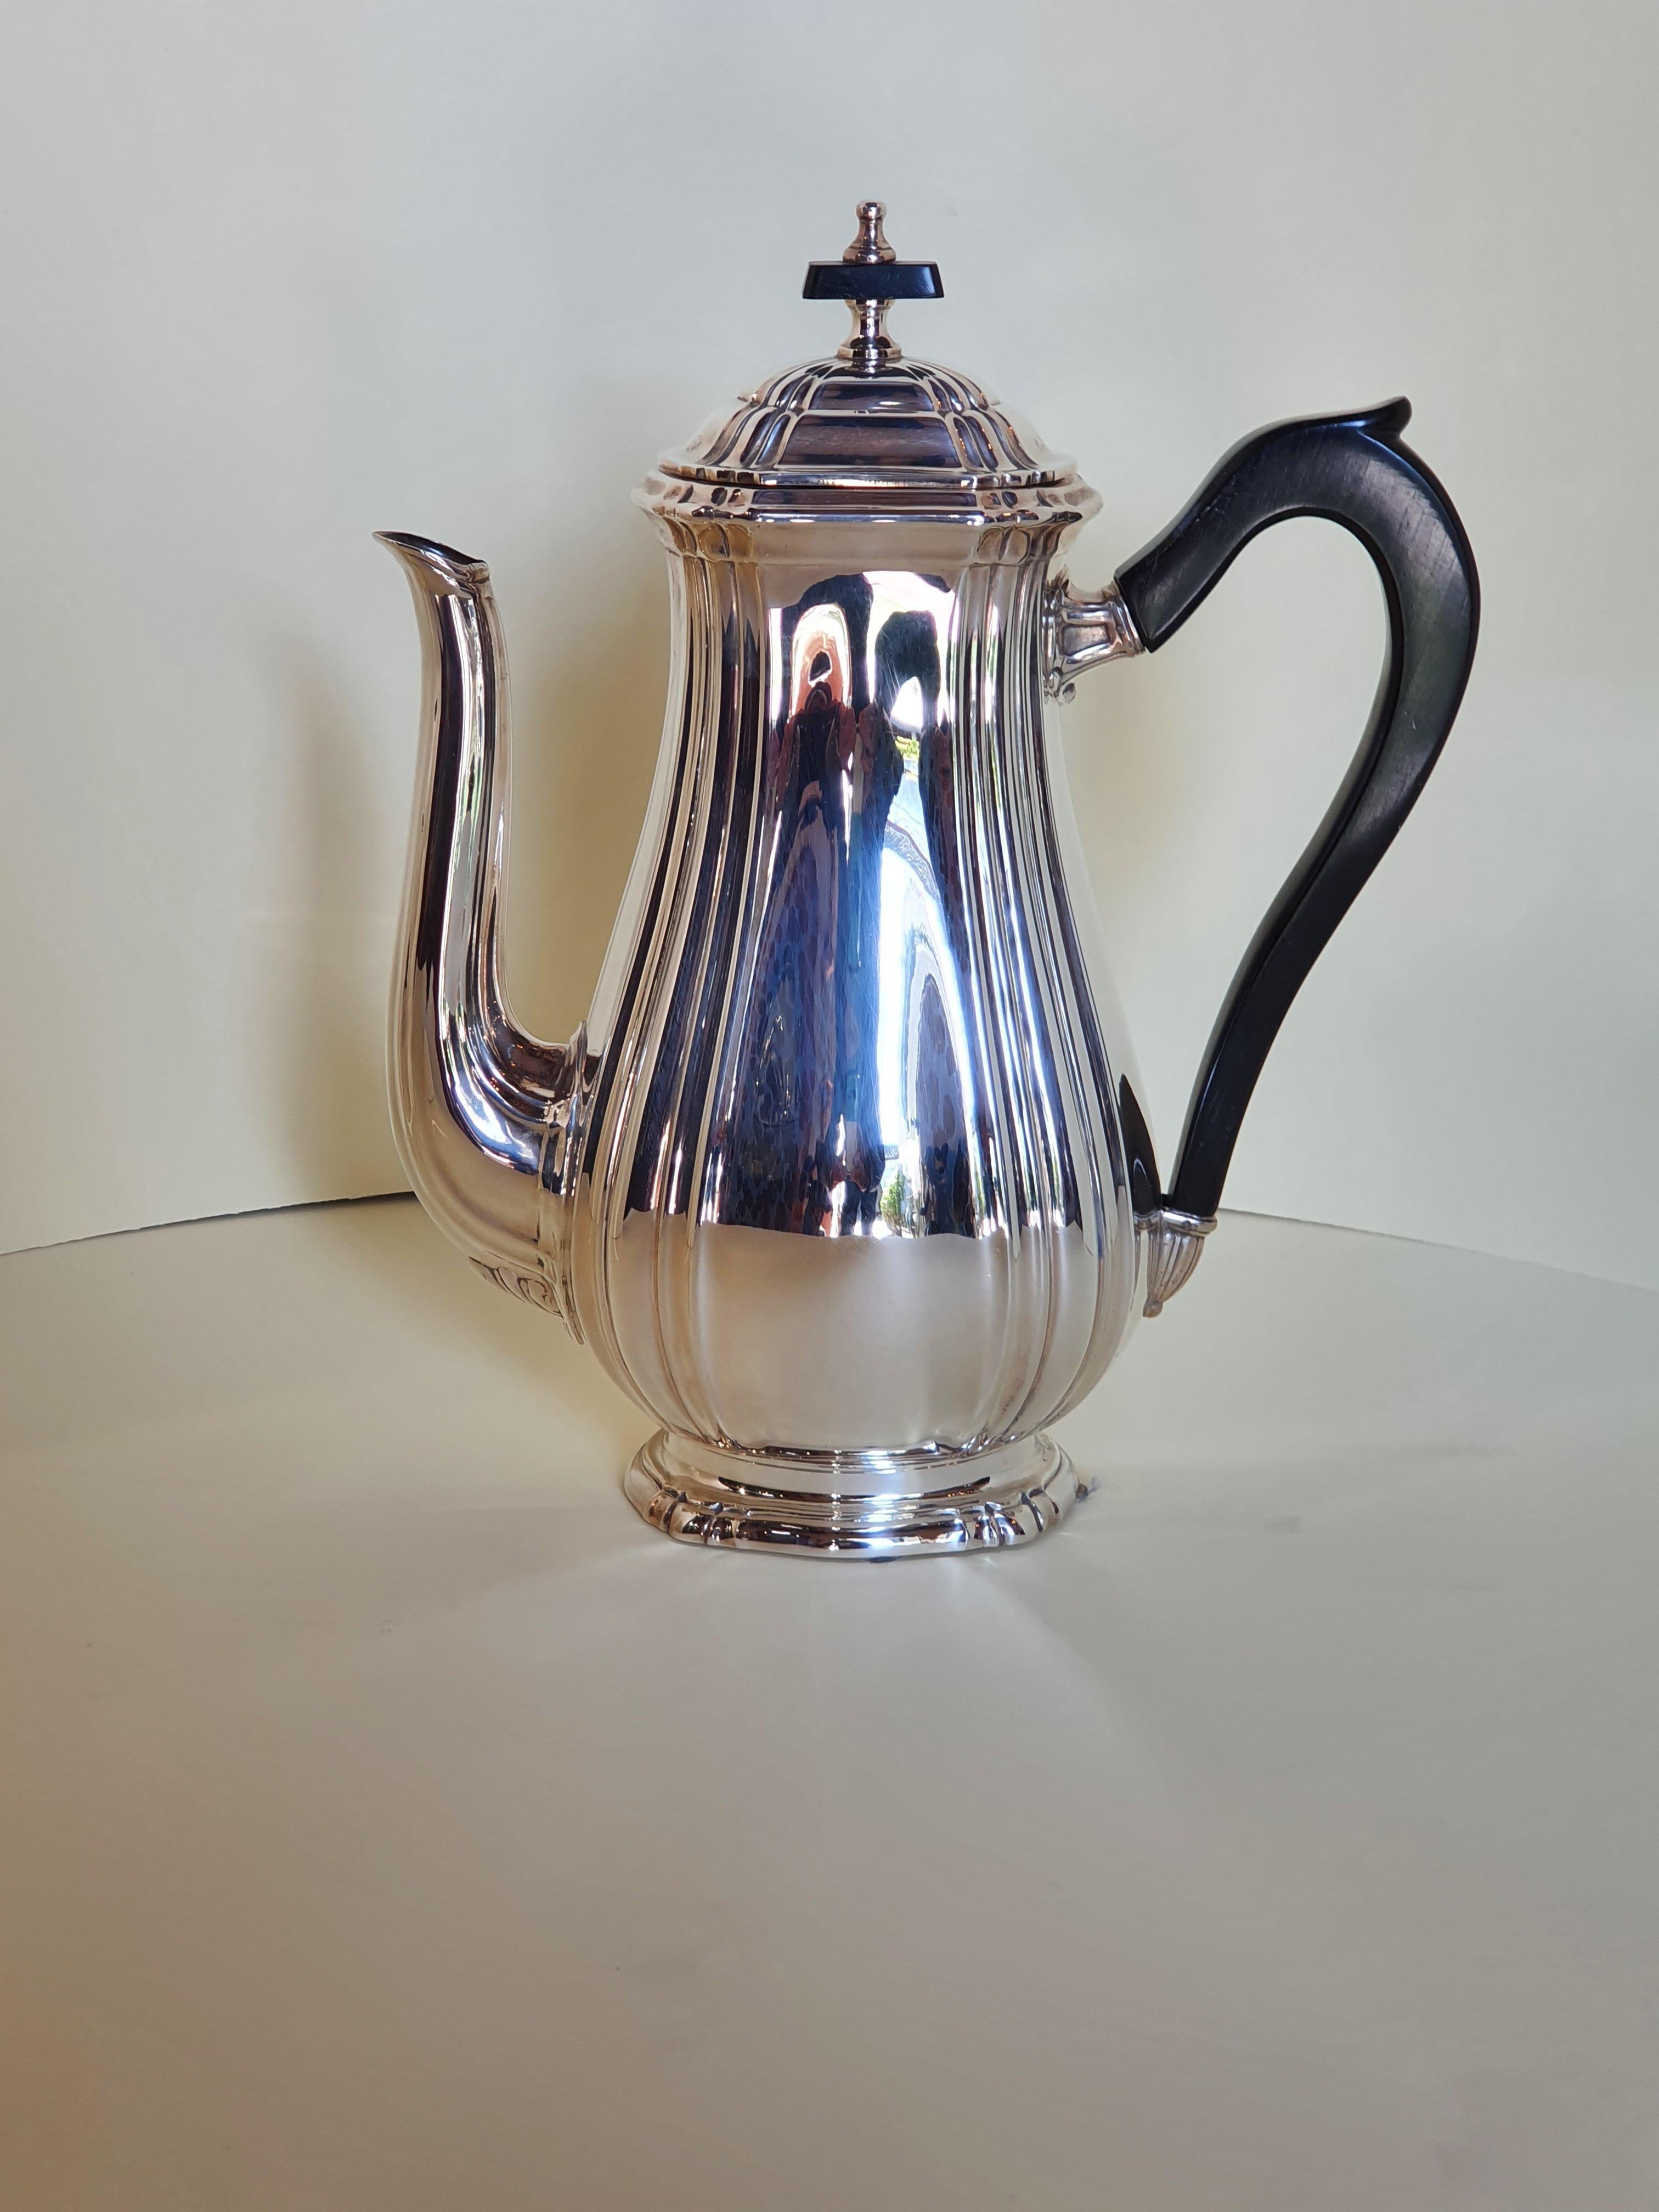 An elegant Georgian style tea and coffee set in hand chiseled sterling silver by the Italian silversmith Argenteria Auge.
Composed of 4 objects: one teapot, one coffee pot, one sugar bowl with lid and a milker. Pieces are in pear-shaped form with